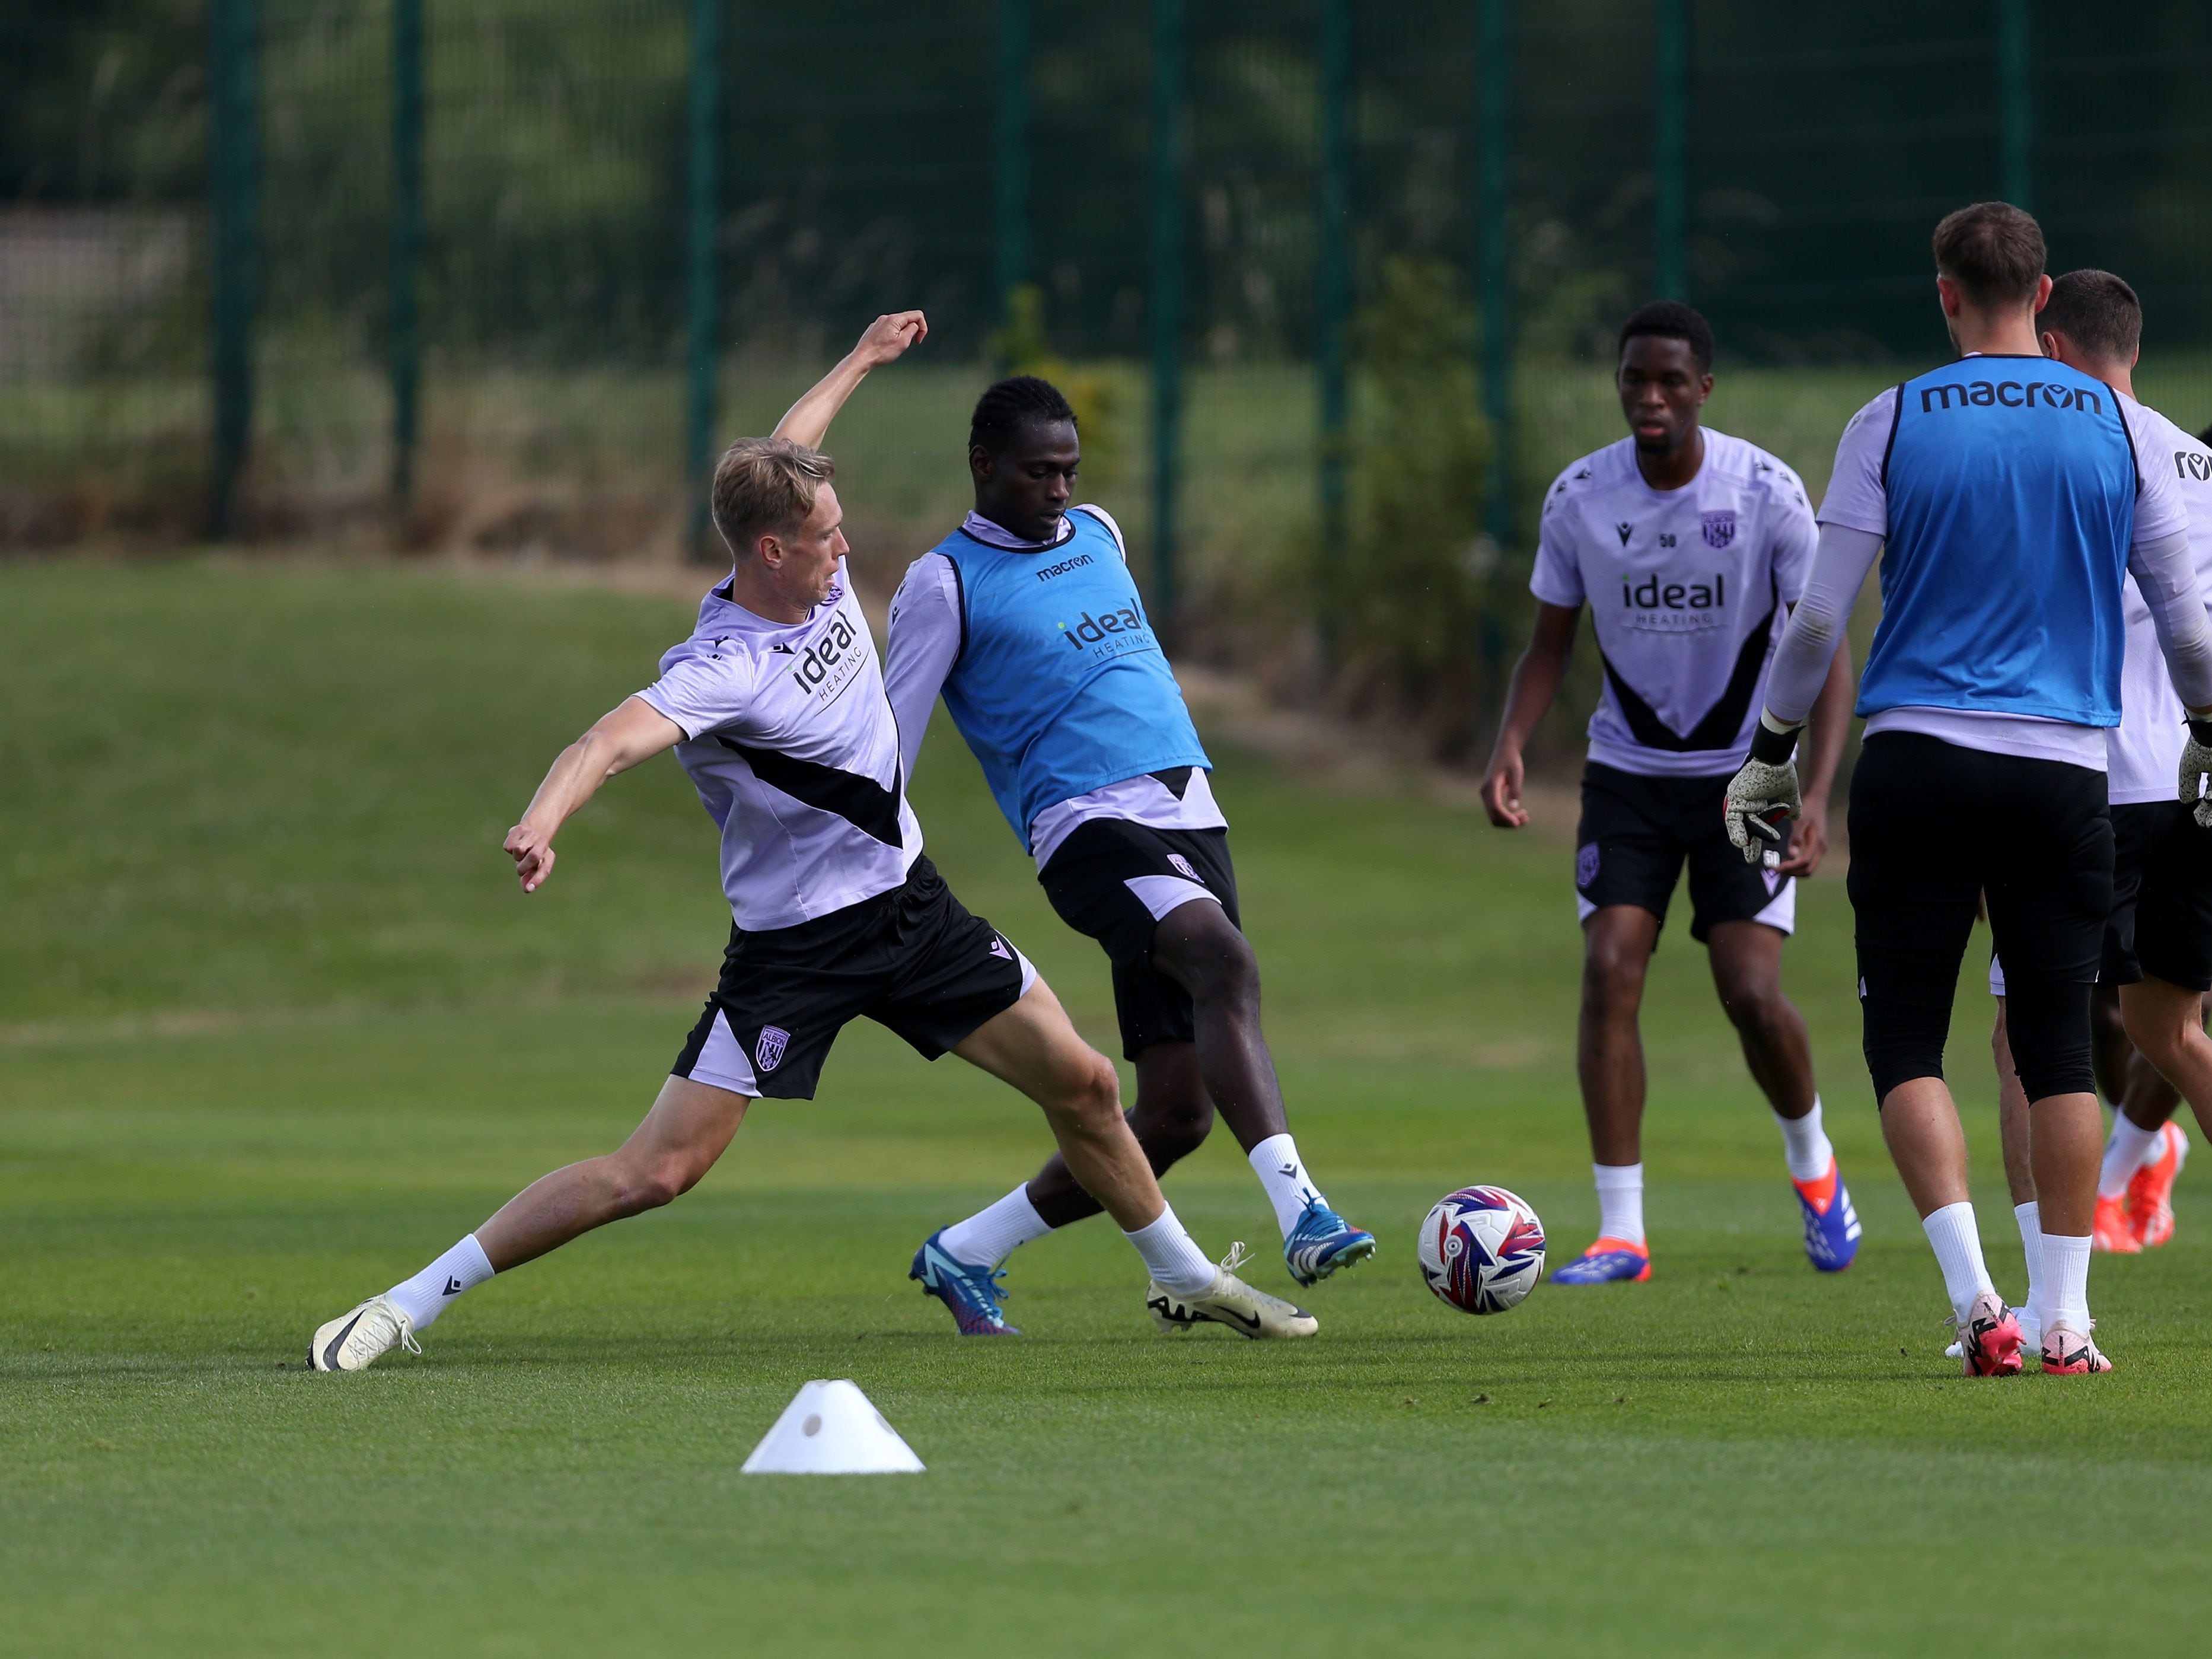 West Brom pre-season: New boys and young talents look to impress ahead of new campaign